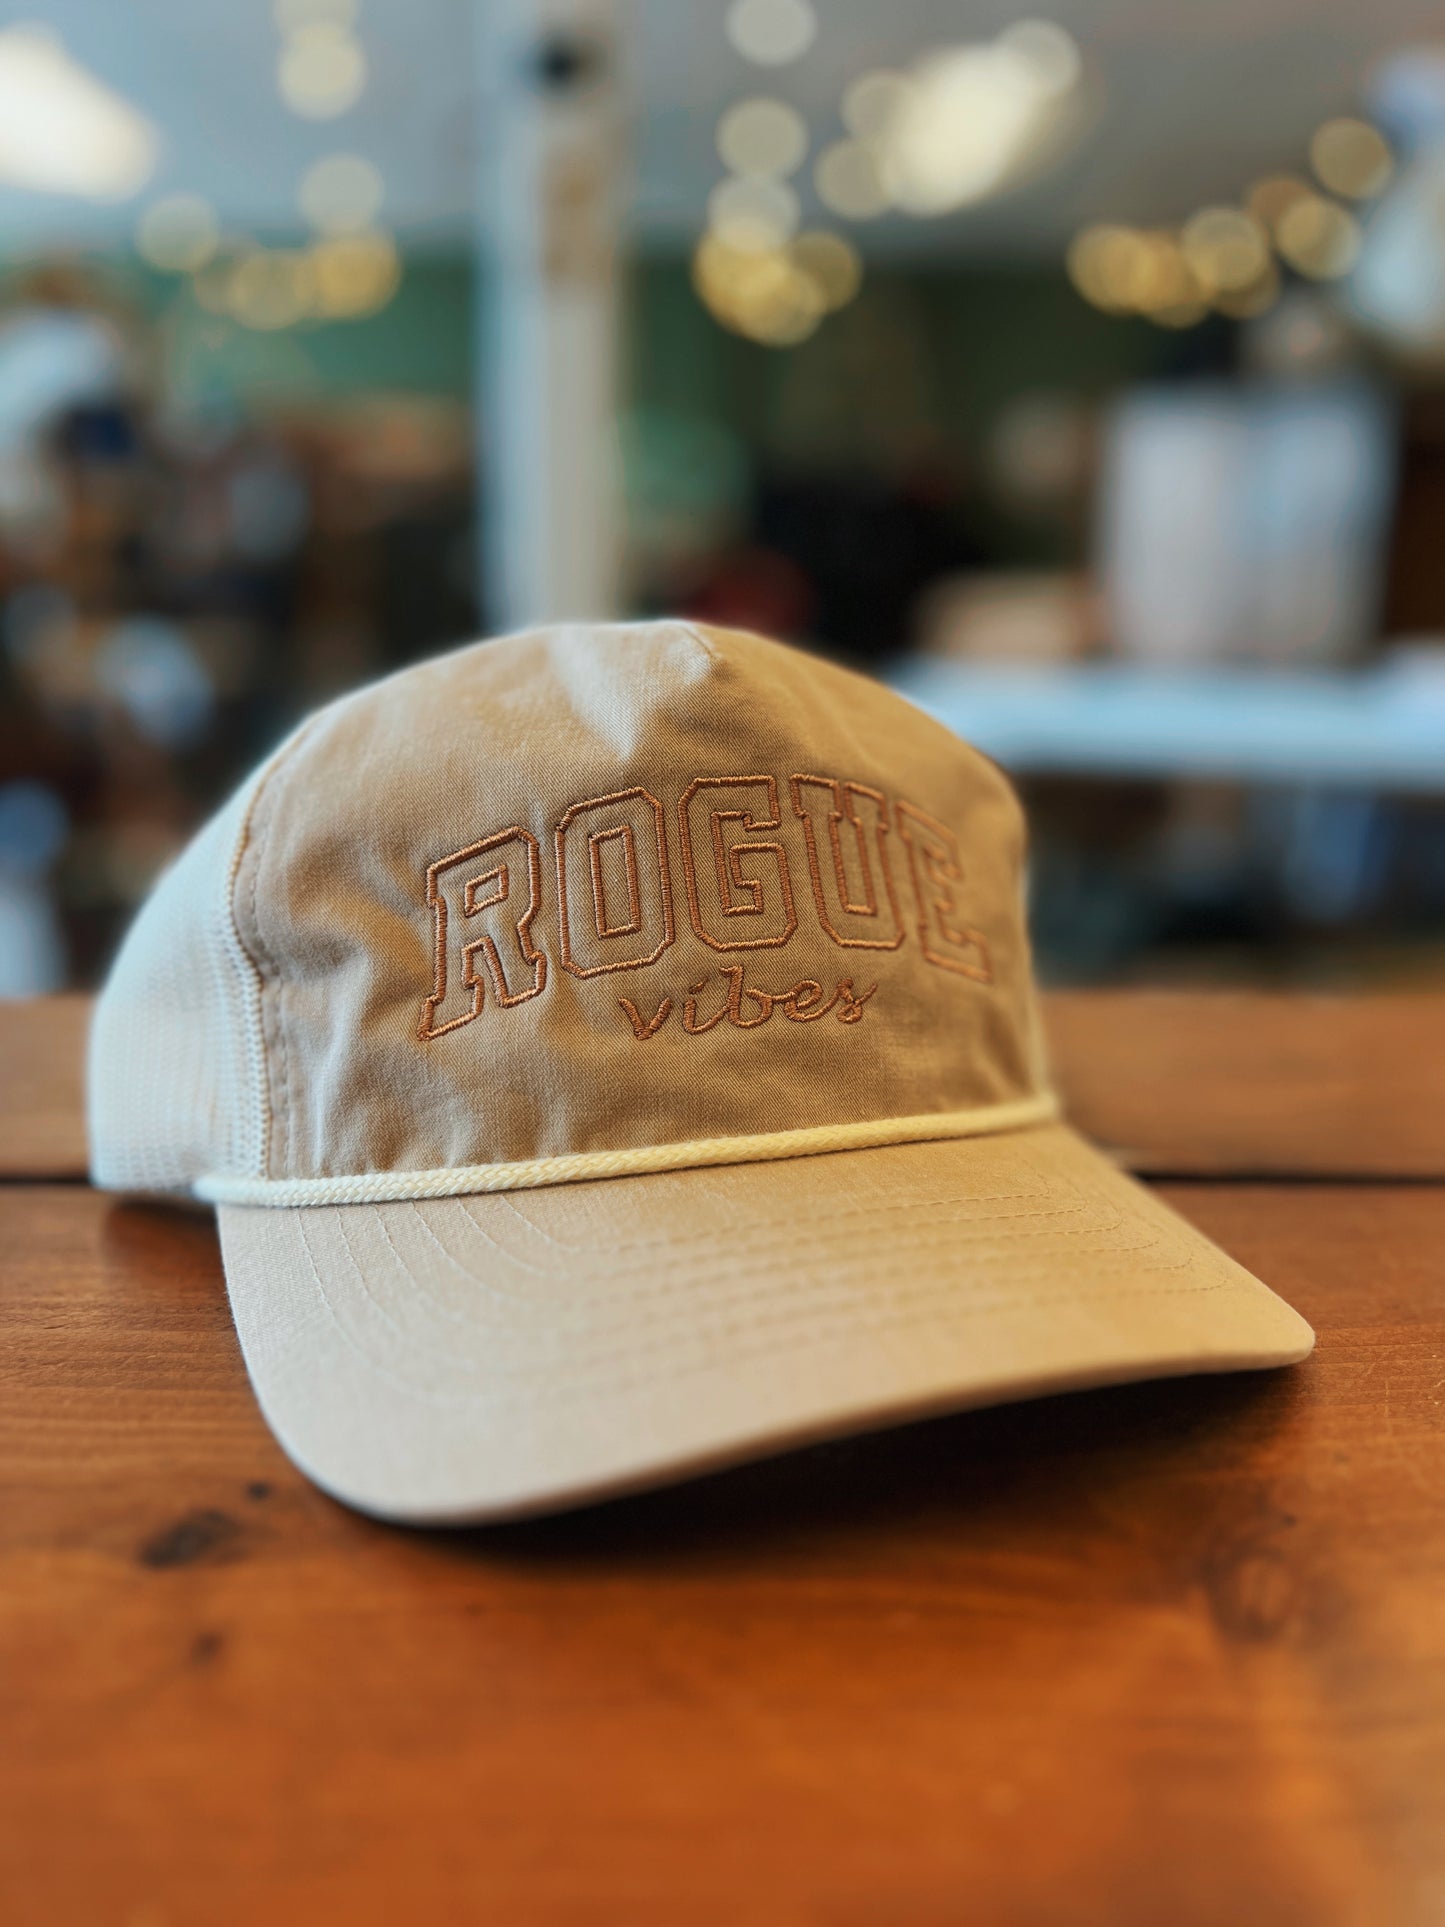 Rogue Vibes Unstructured Hat